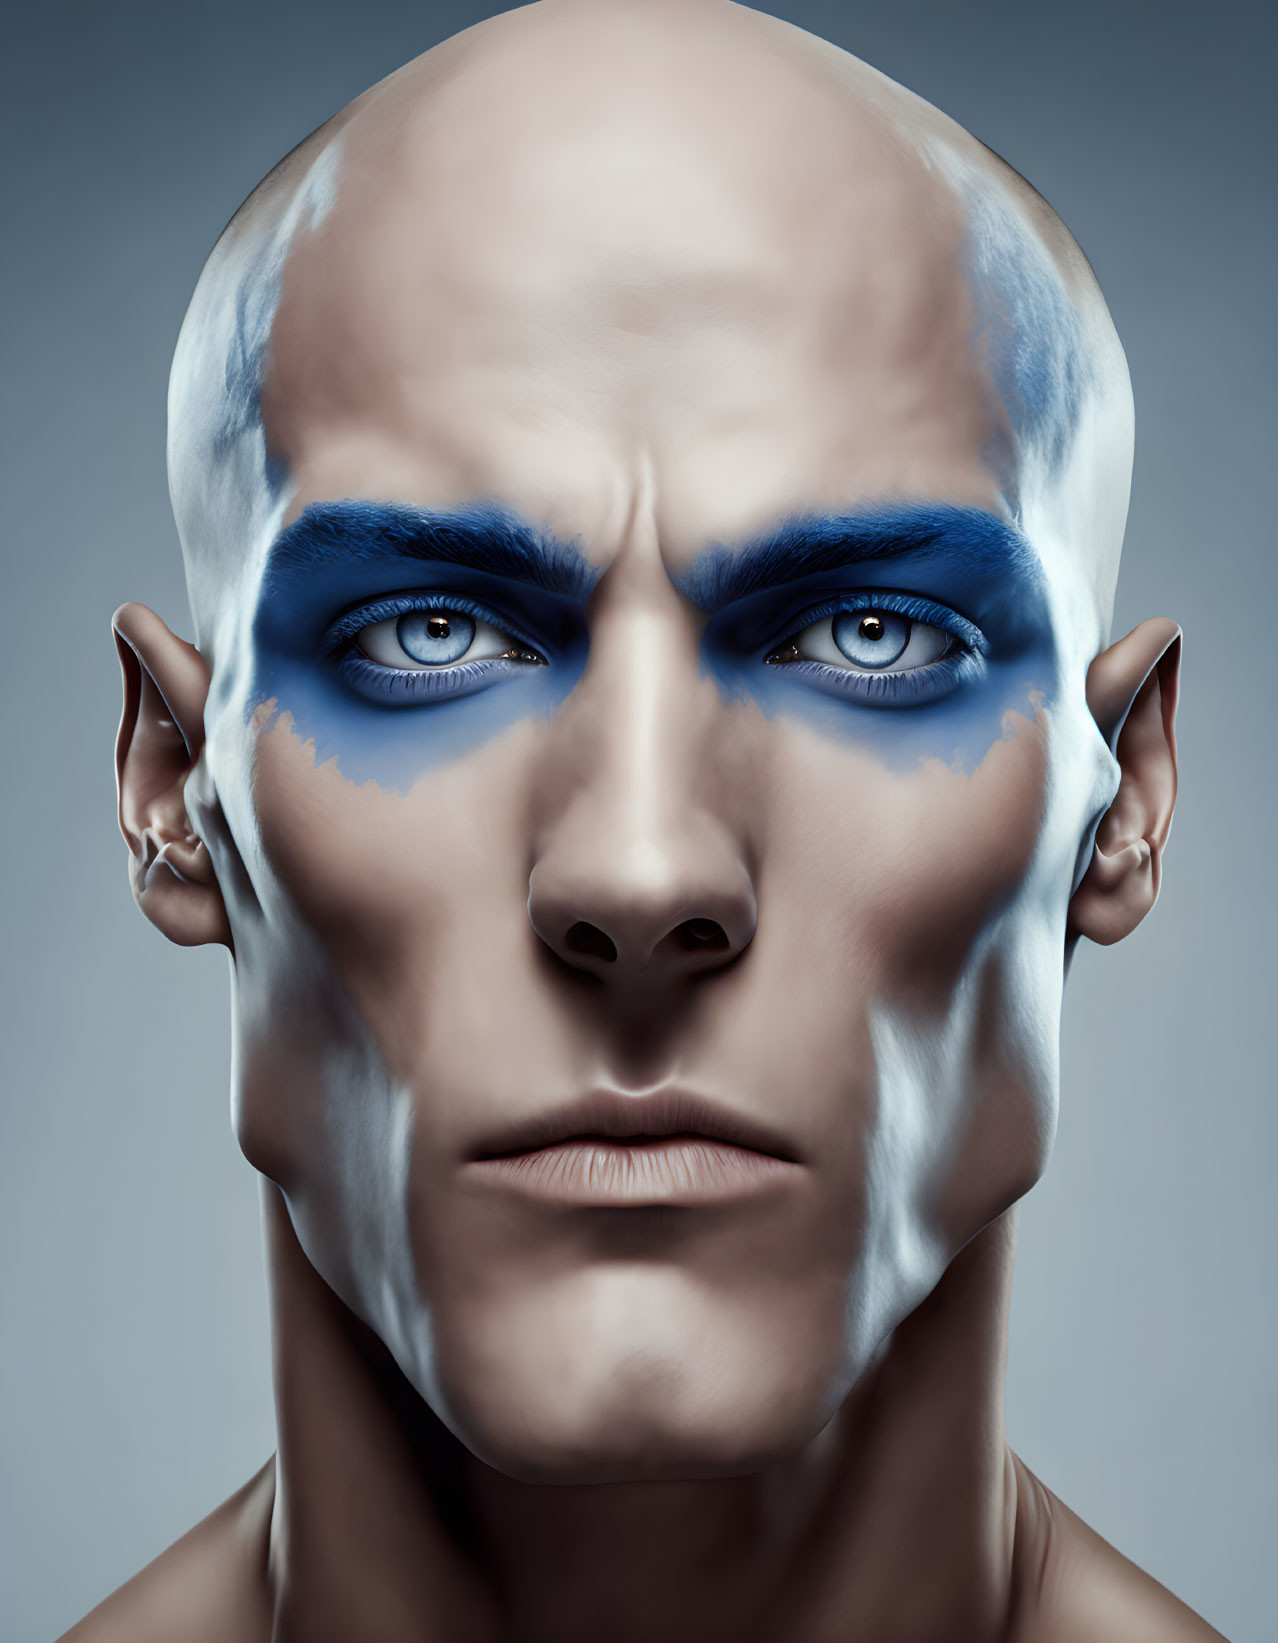 Bald person with blue paint eyes staring intensely on grey background